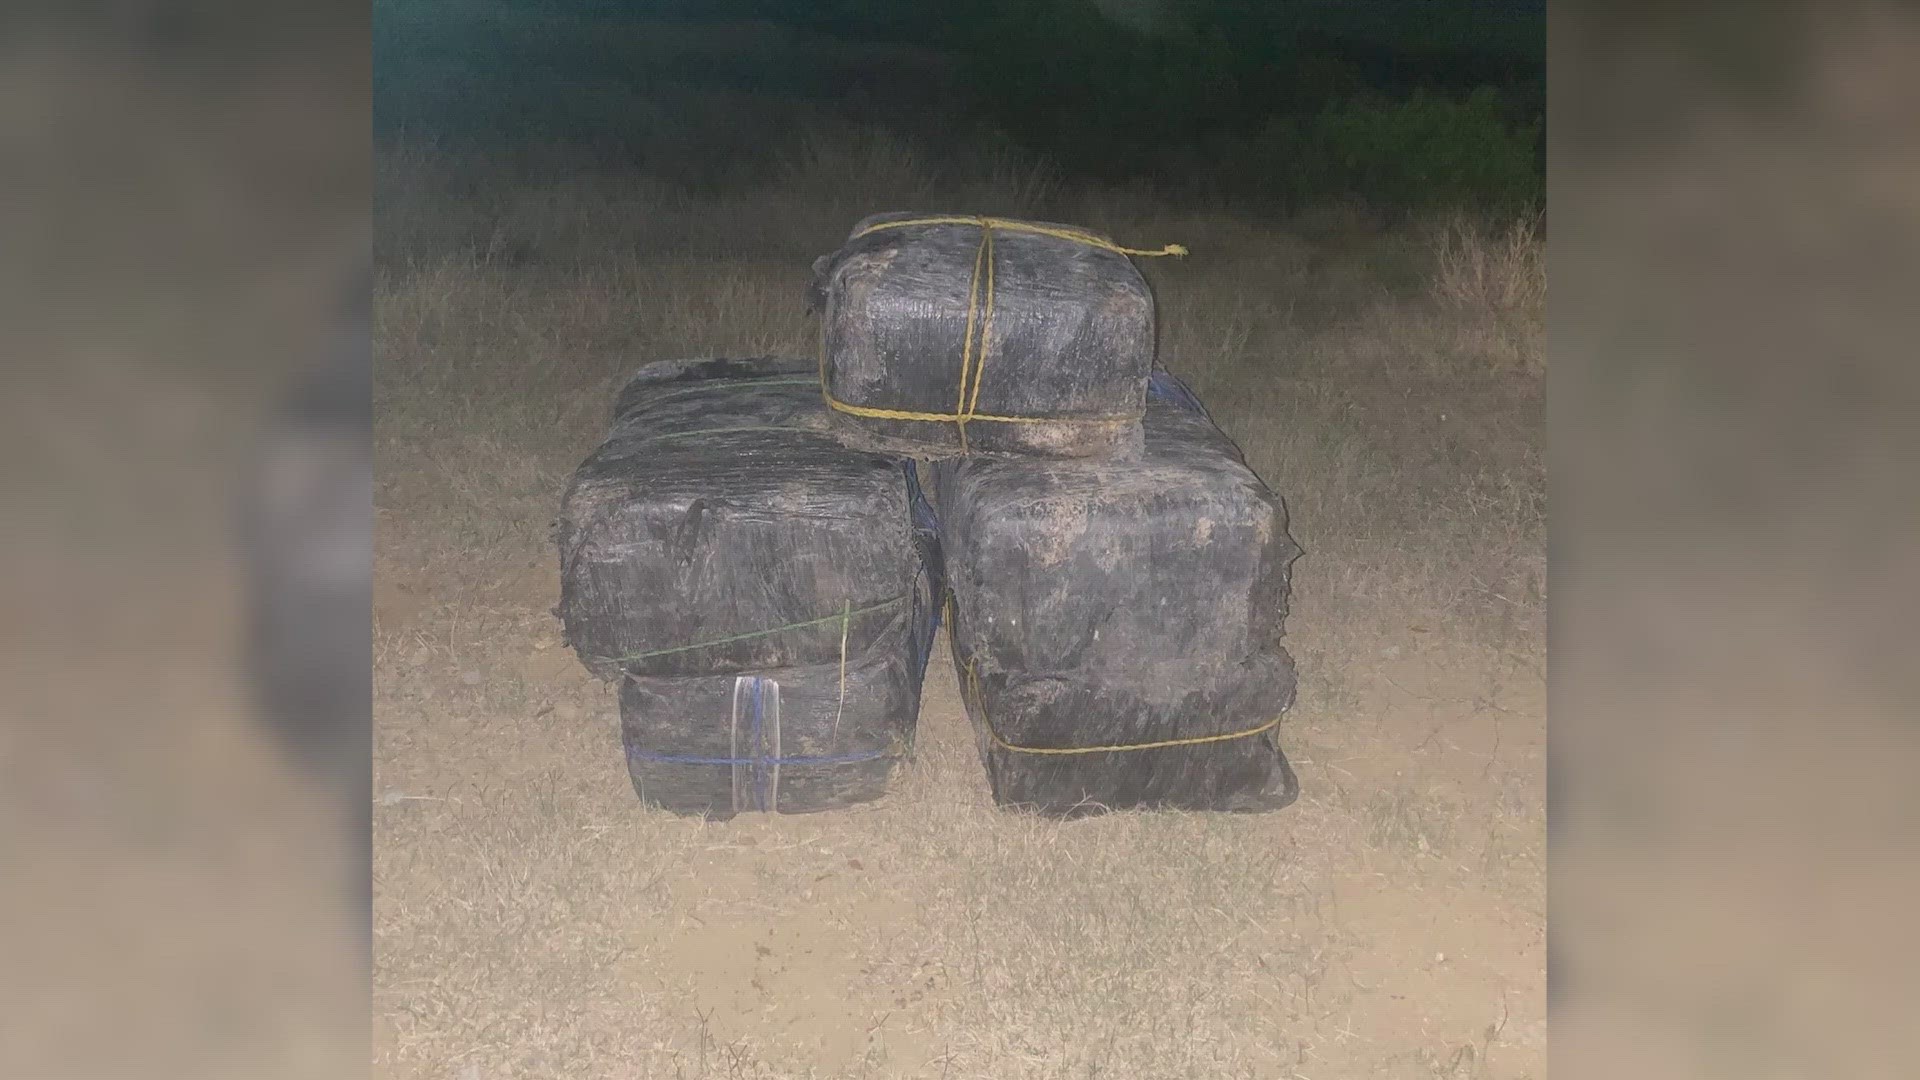 Agents got a tip about a possible smuggling event and secured five bundles of marijuana that weighed over 300 pounds.